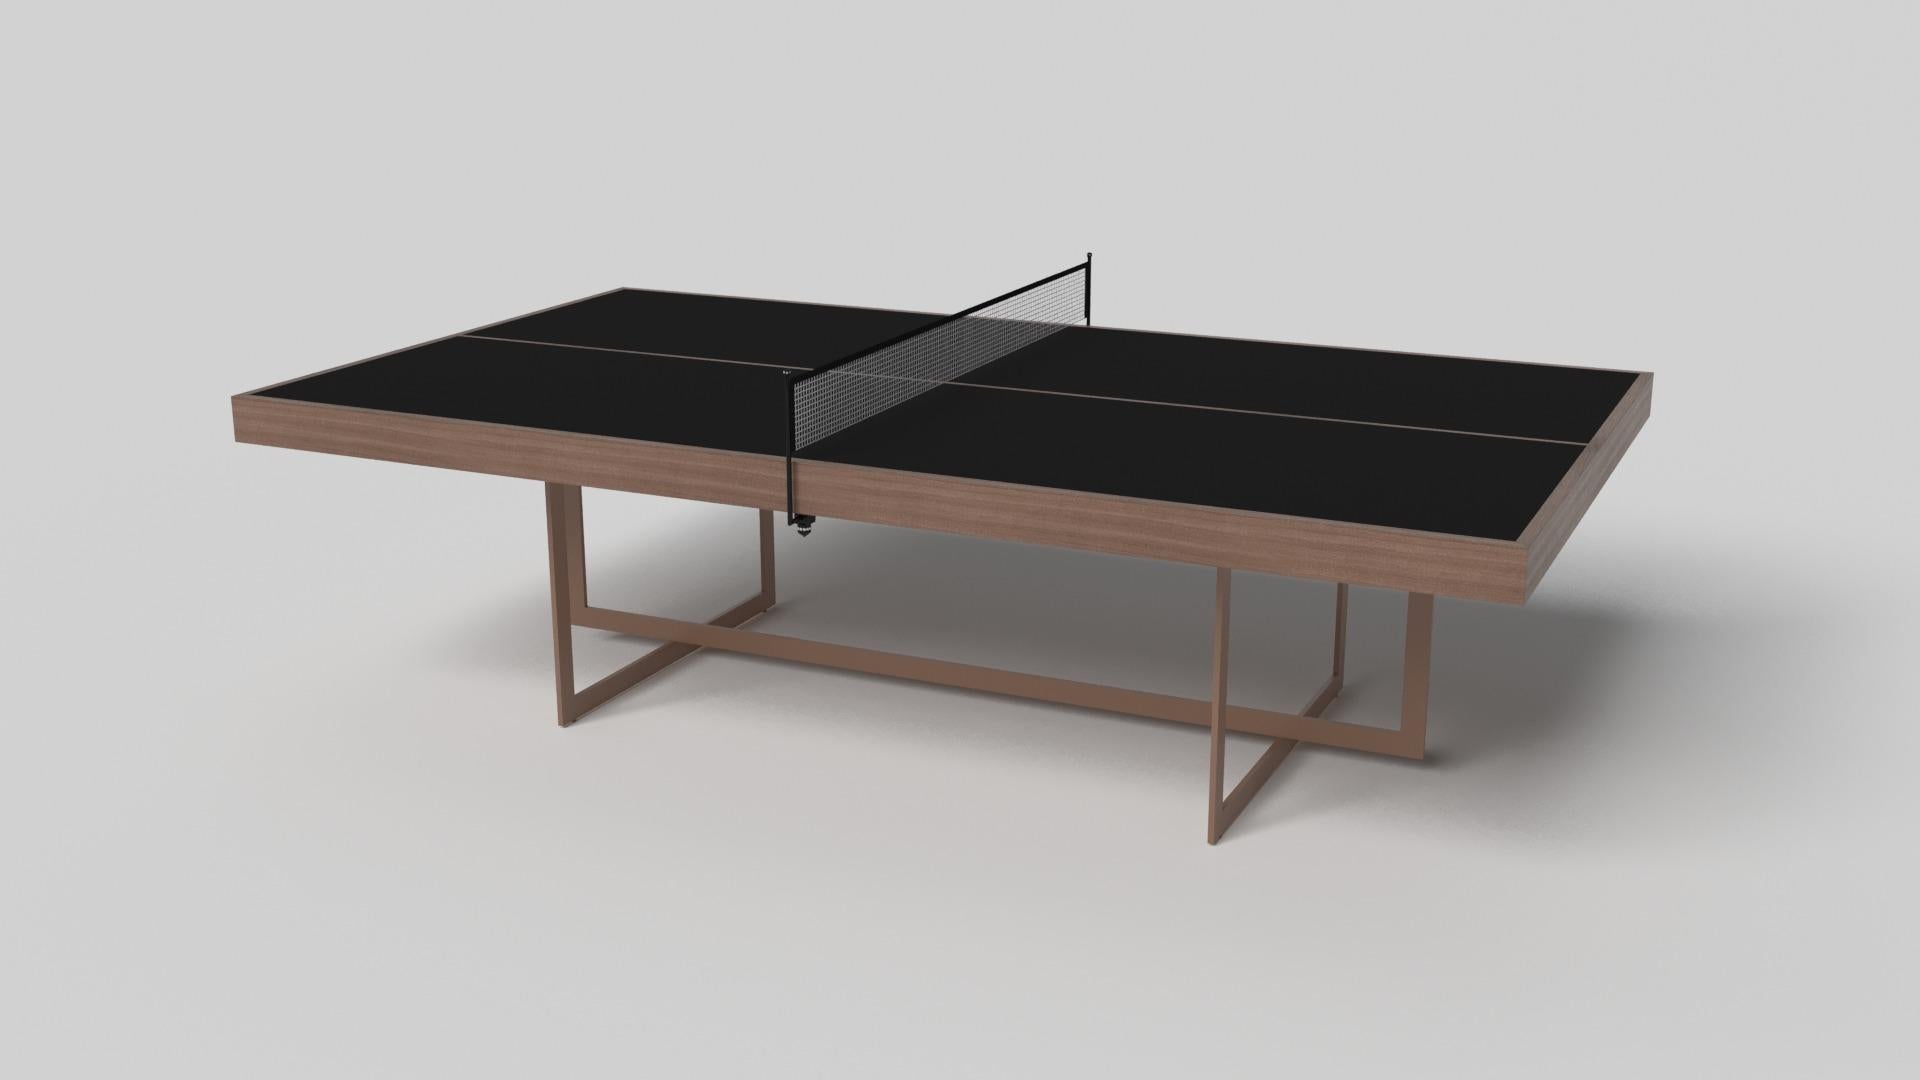 With an open metal foundation, our Beso table is a unique expression of contemporary forms and negative space. This table tennis table is handcrafted by our master artisans with a rectangle-in-rectangle base that echoes the angles and edges of a